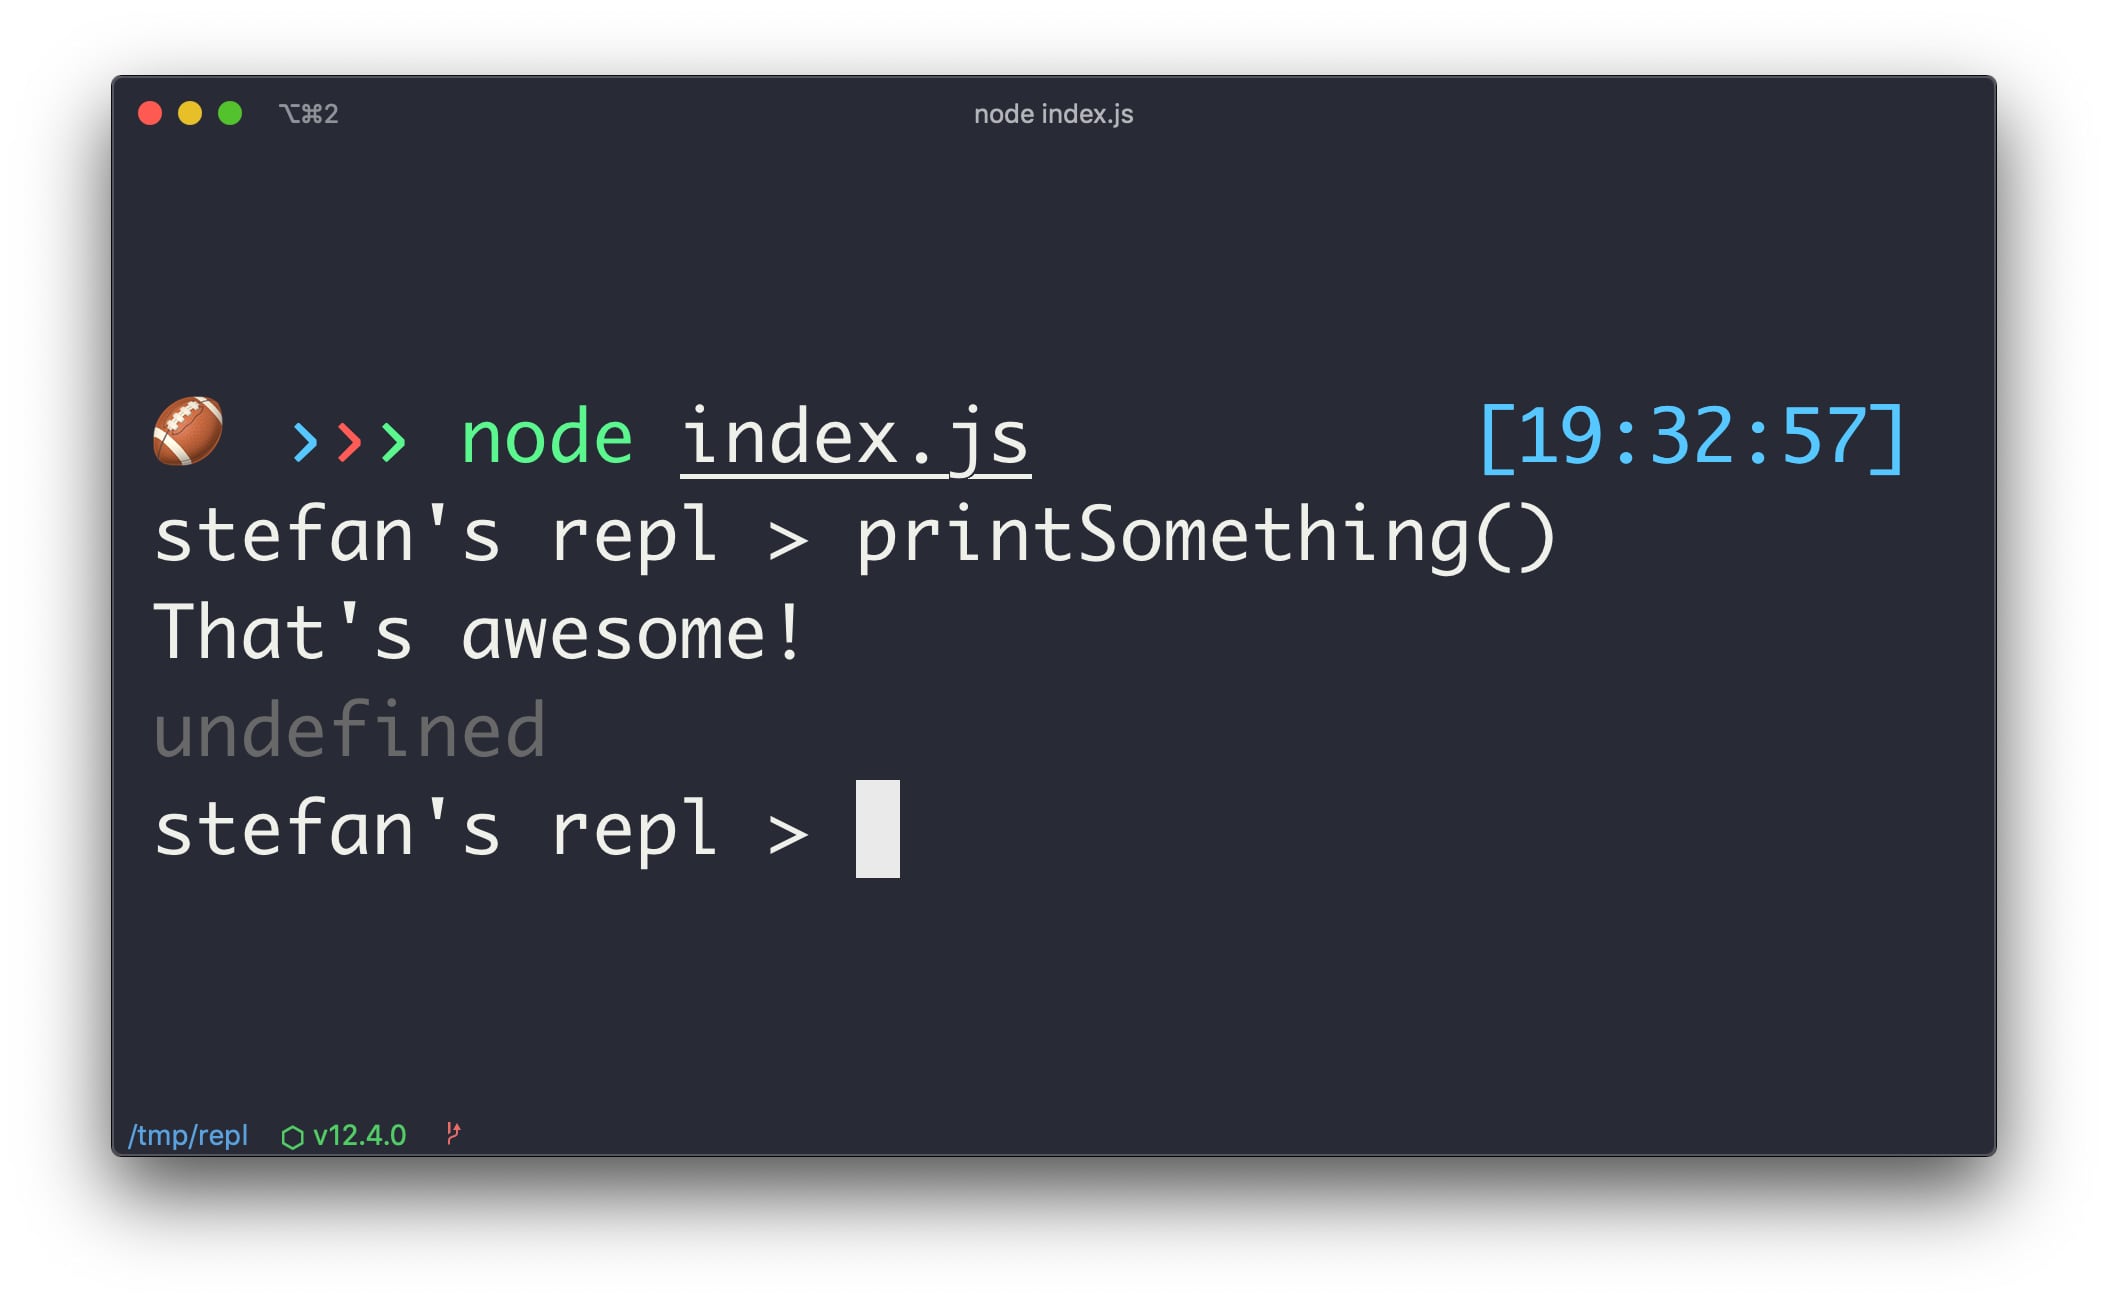 Screenshot of a terminal: start a new REPL by running "node index.js" and see the available command 'printSomething'